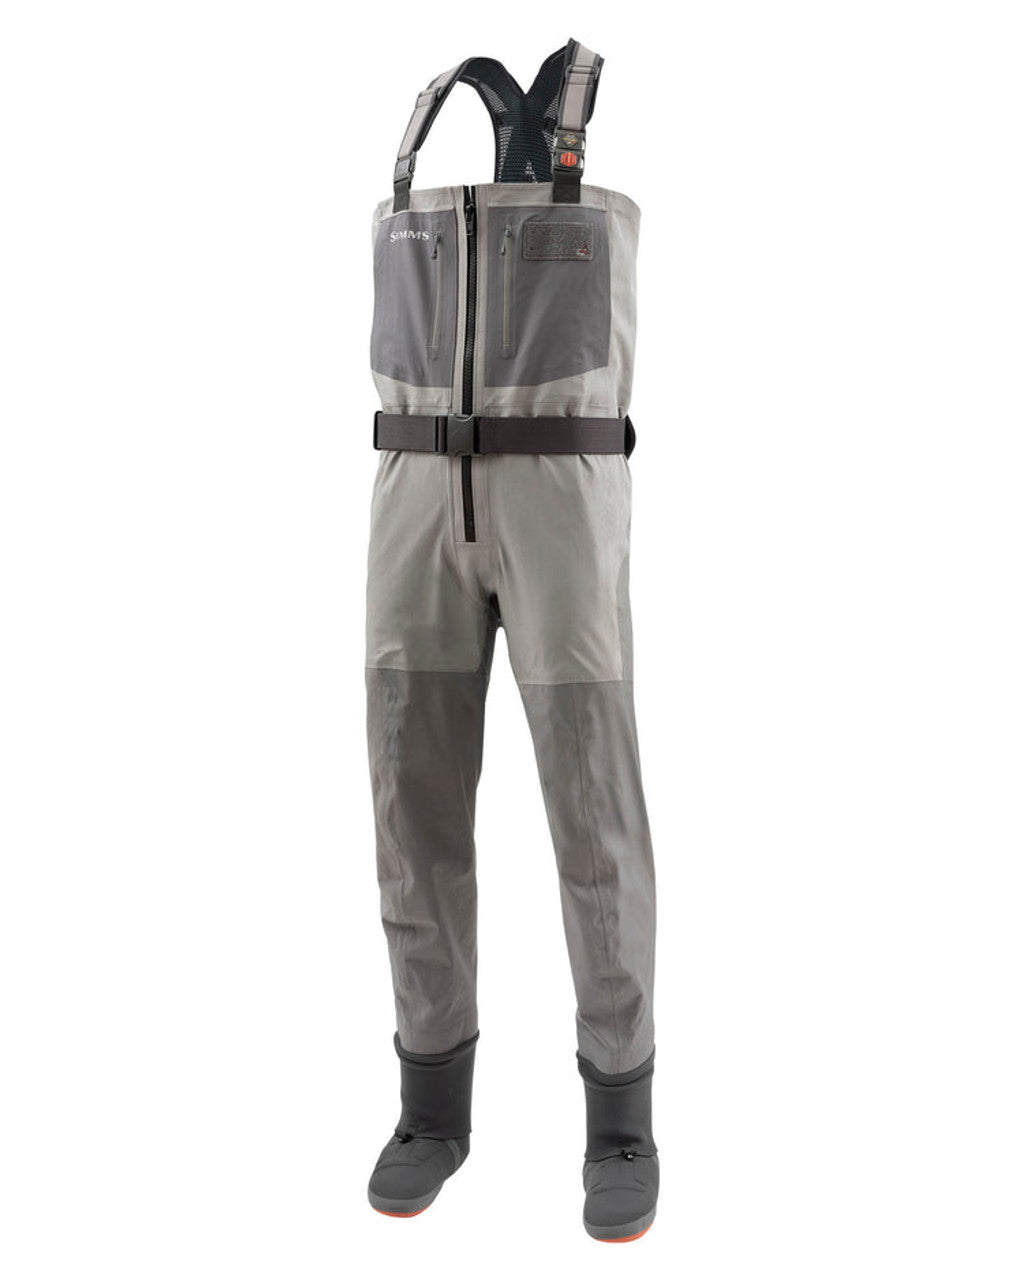 Simms Waders: G4Z Simms Waders from Simms fishing gear 